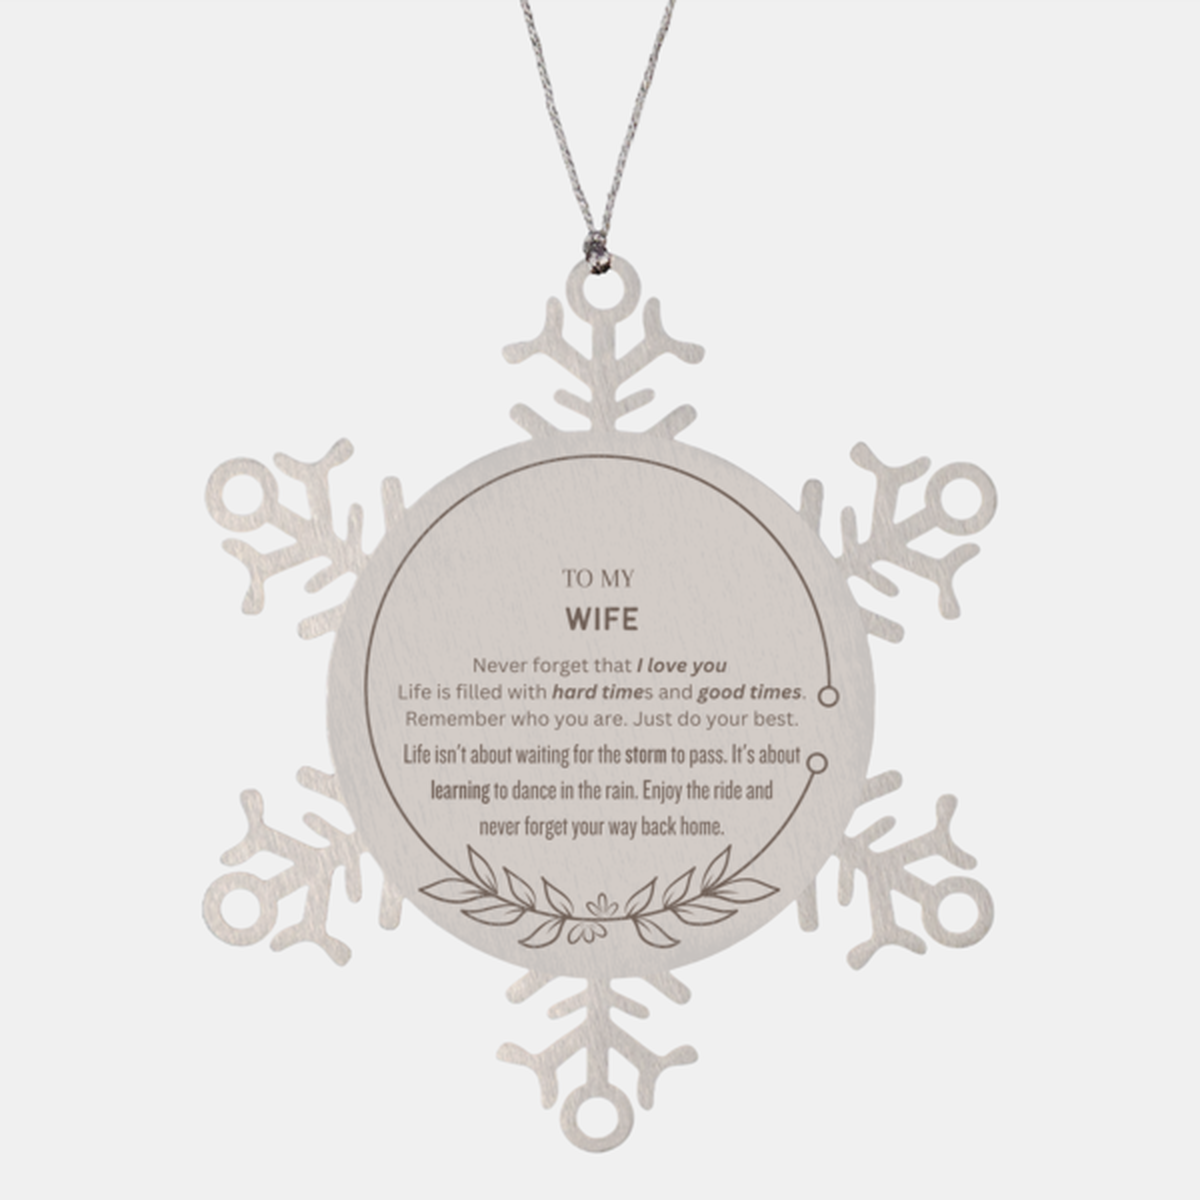 Christmas Wife Snowflake Ornament Gifts, To My Wife Thank You Gifts For Wife, Xmas Decorations Unique Gifts For Wife To My Wife Never forget that I love you life is filled with hard times and good times. Remember who you are. Just do your best